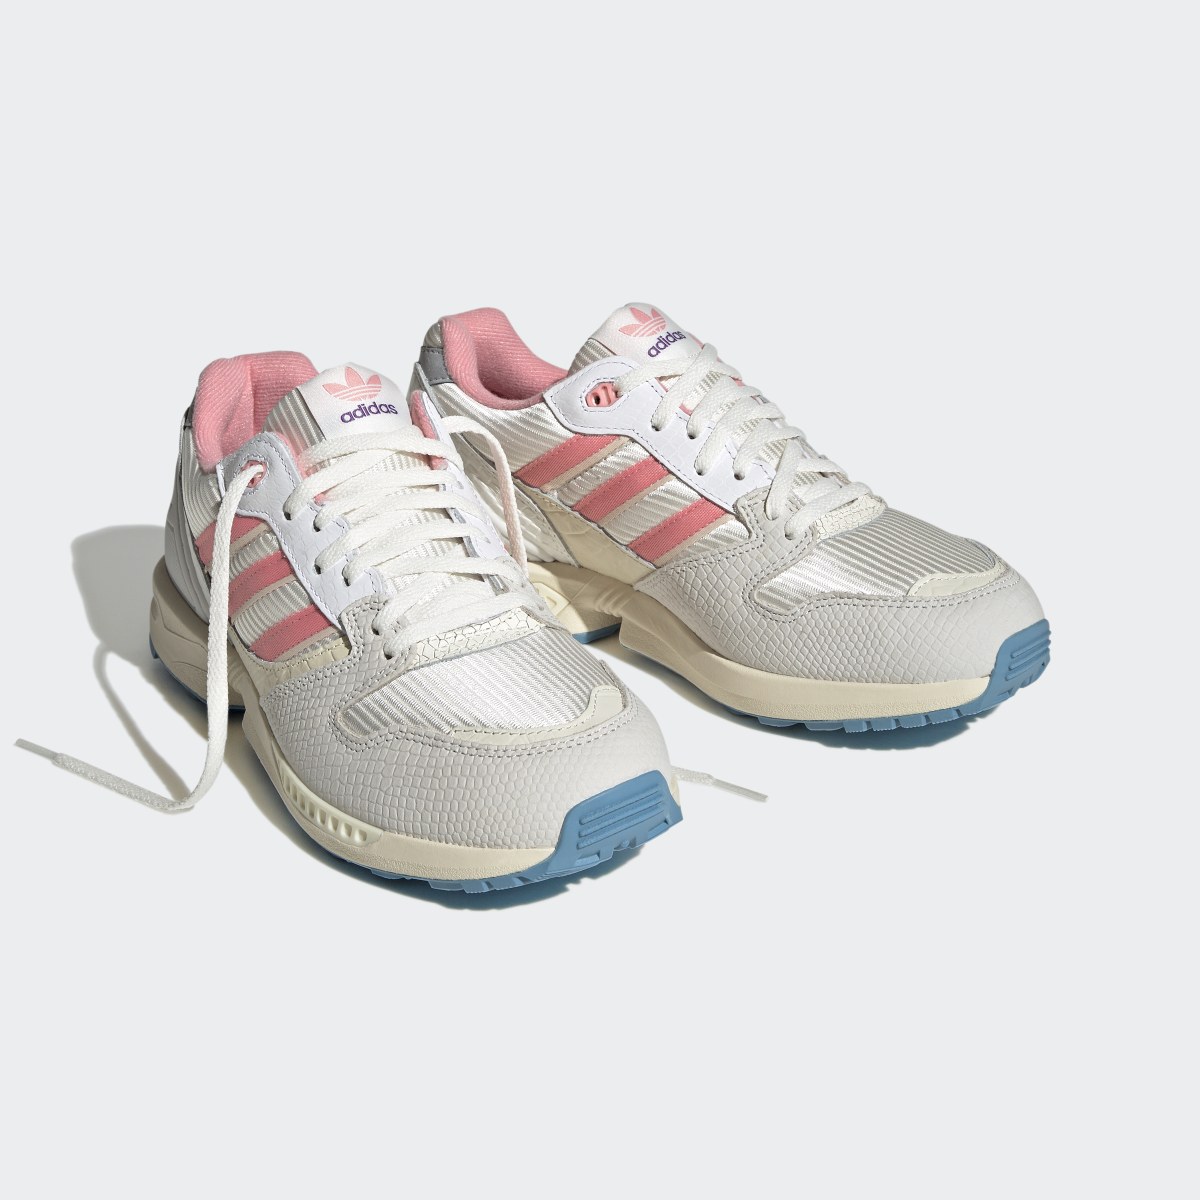 Adidas ZX 5020 Shoes. 5